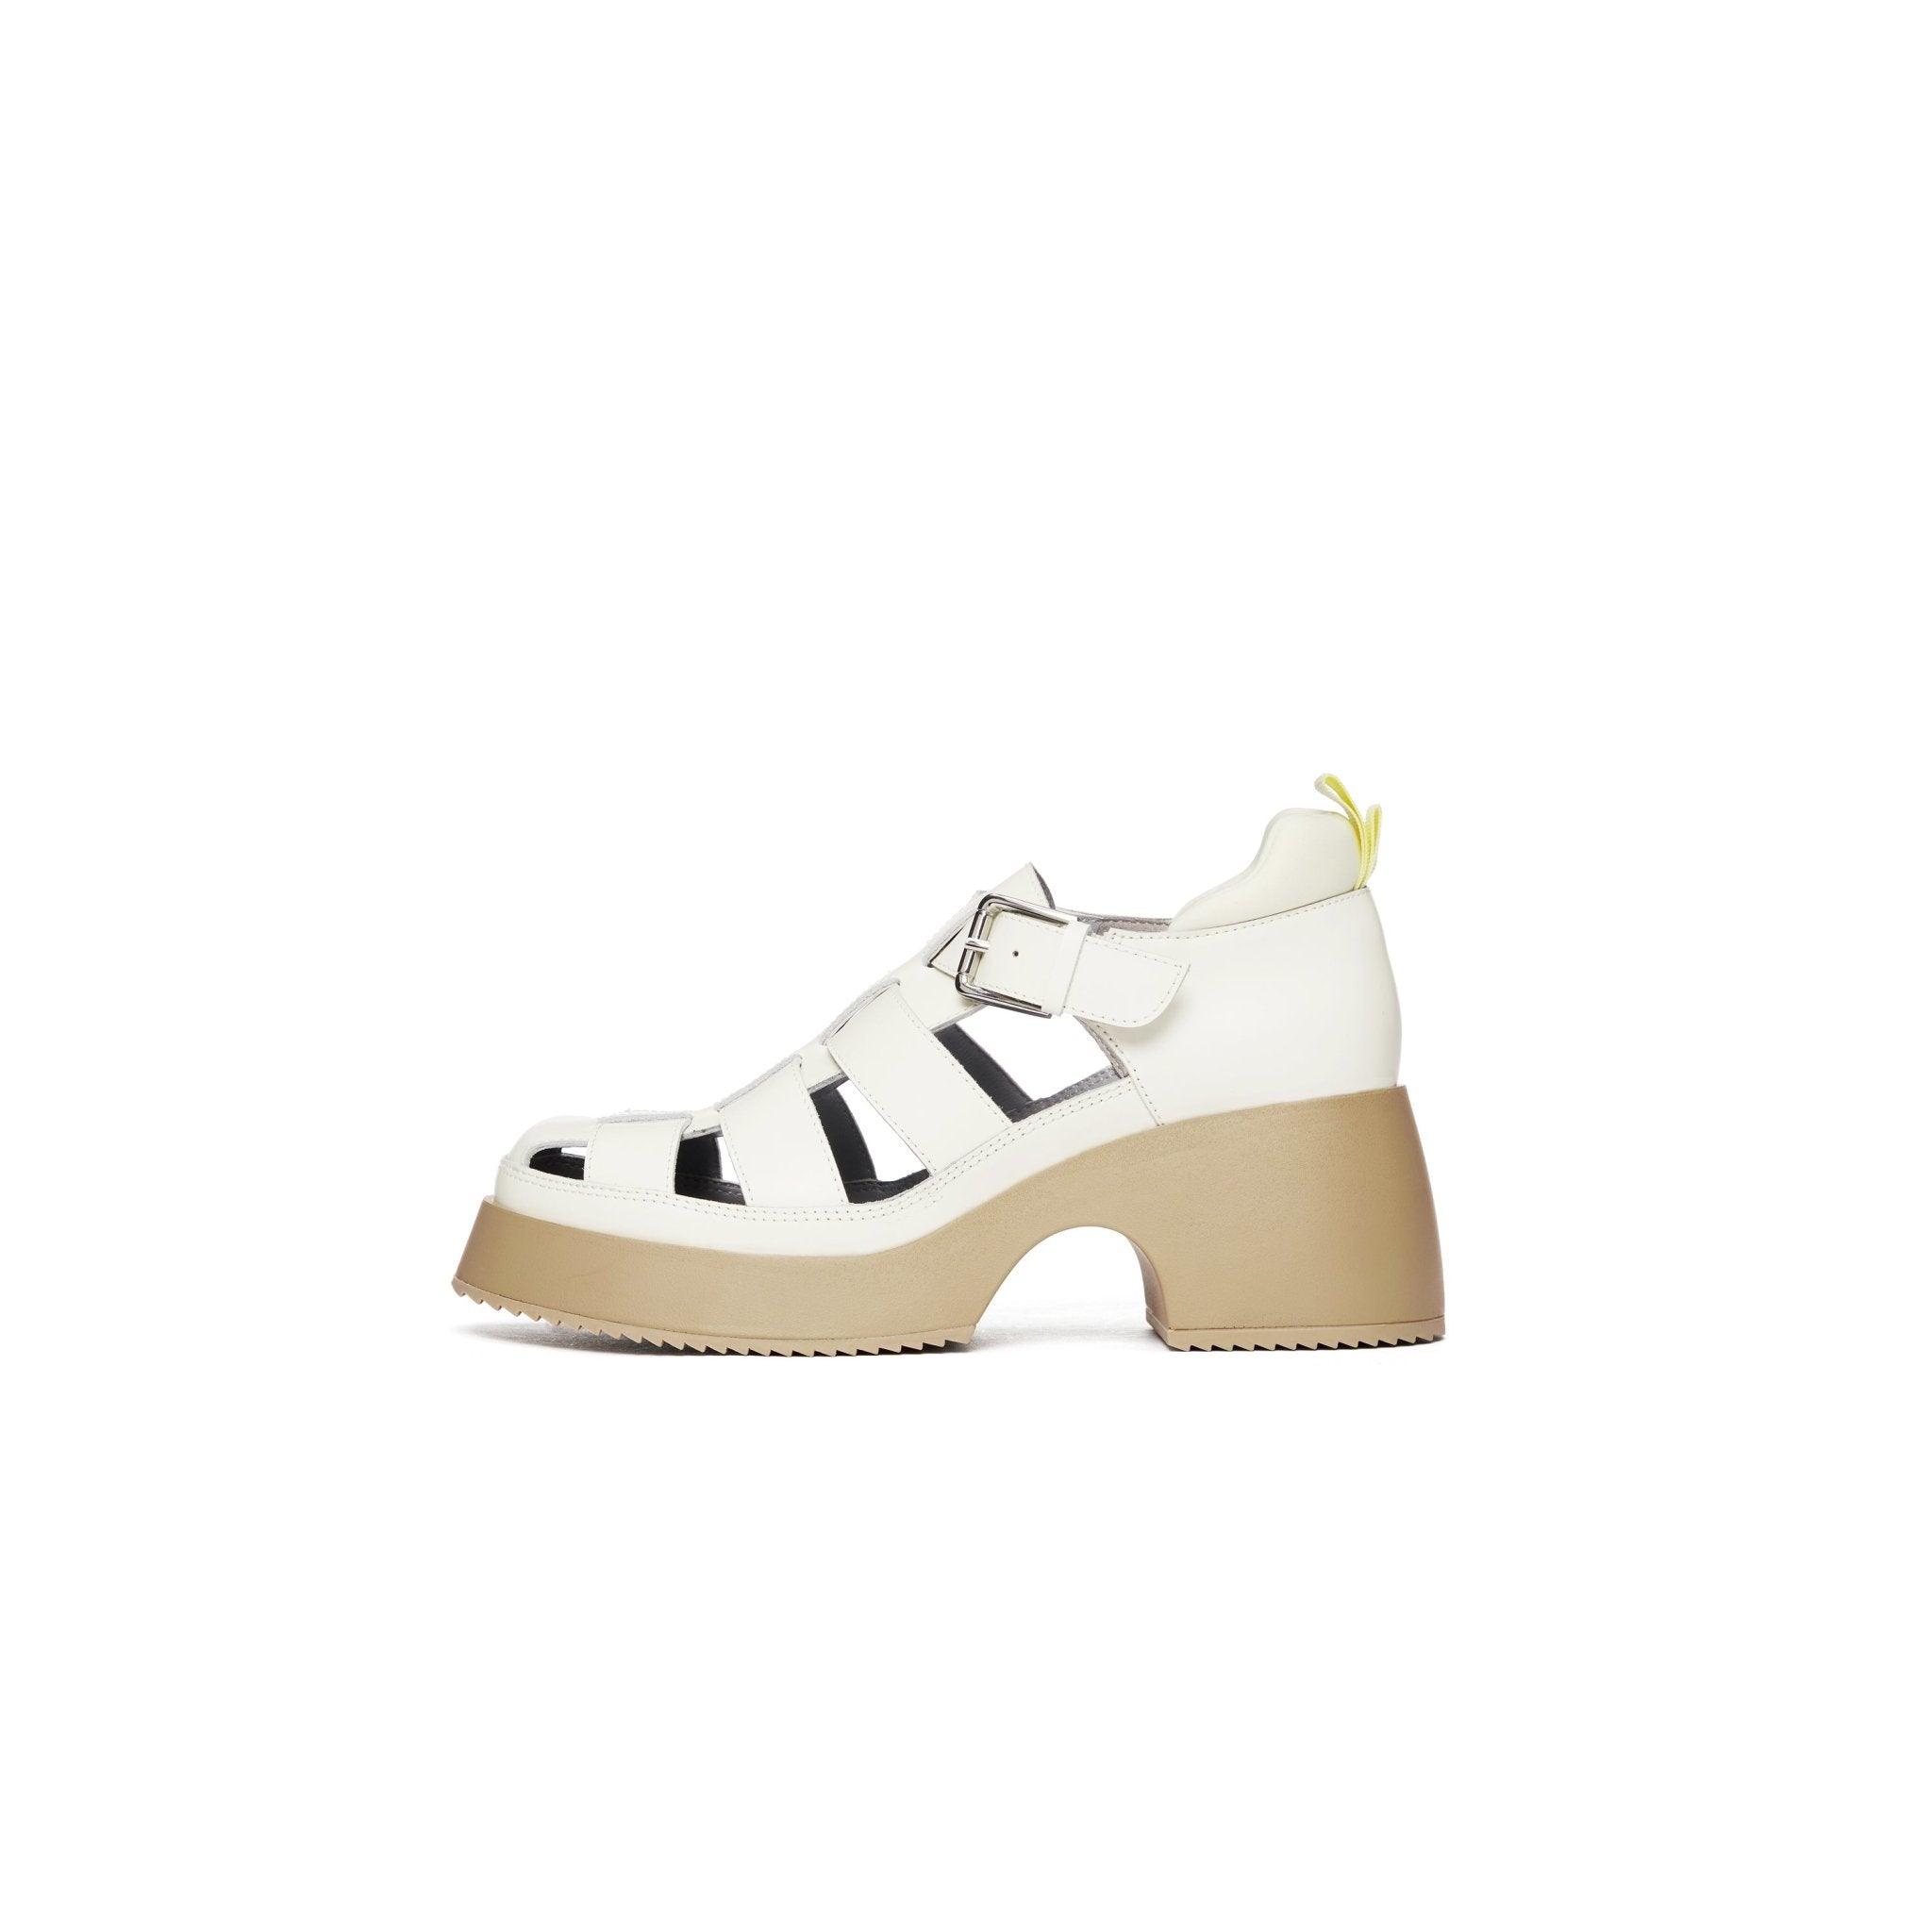 LOST IN ECHO White Braided Thick-soled Gladiator Sandals | MADA IN CHINA